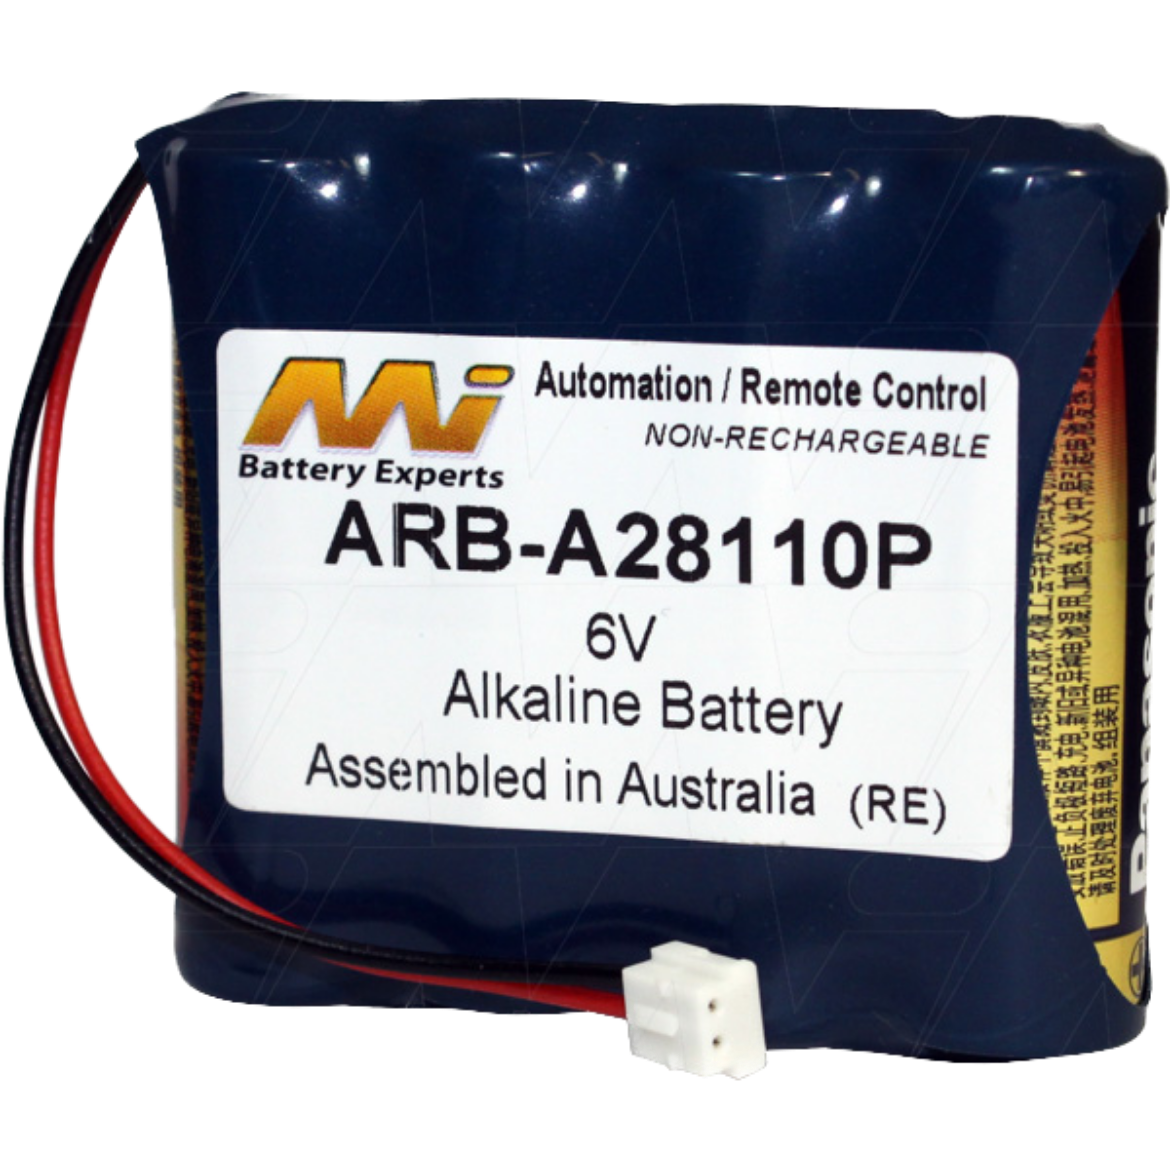 Picture of ARB-A28110P 6V Alkaline Battery for Saflok Electronic Hotel Door Lock Access